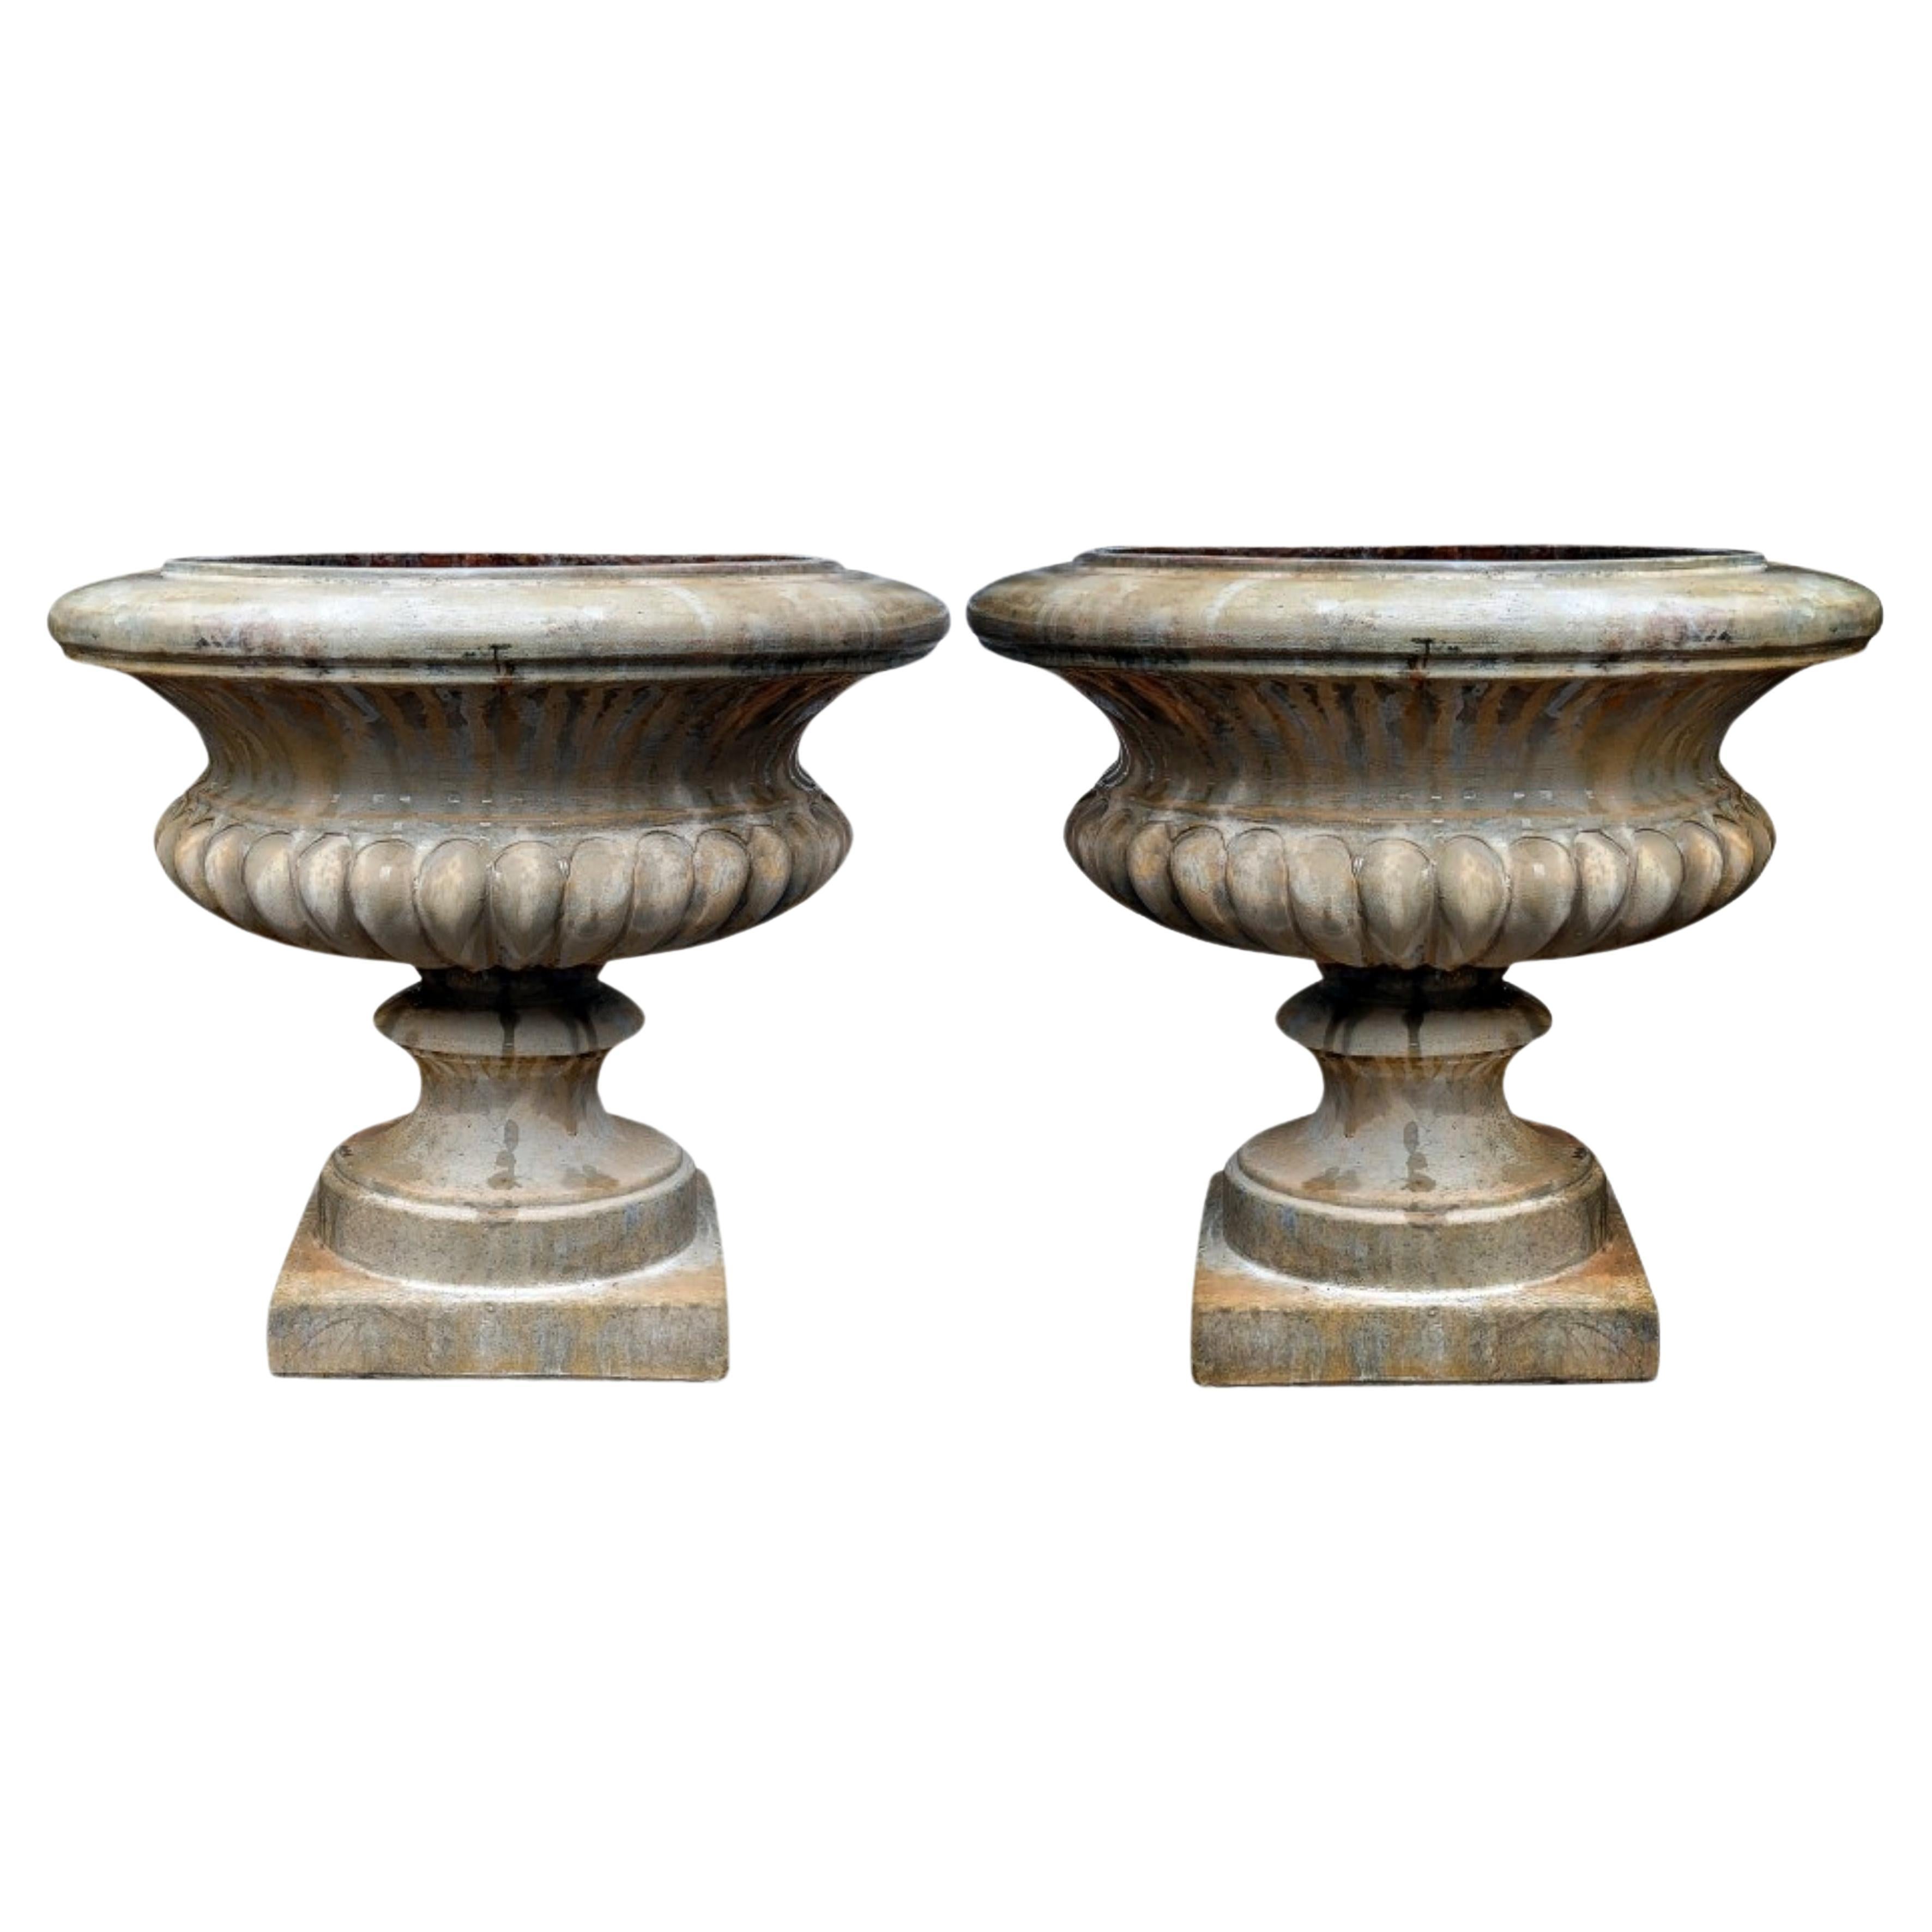 PAIR OF LARGE MEDICI TERRACOTTA GOBLETS FROM IMPRUNETA BACCELLATO 20th Century For Sale